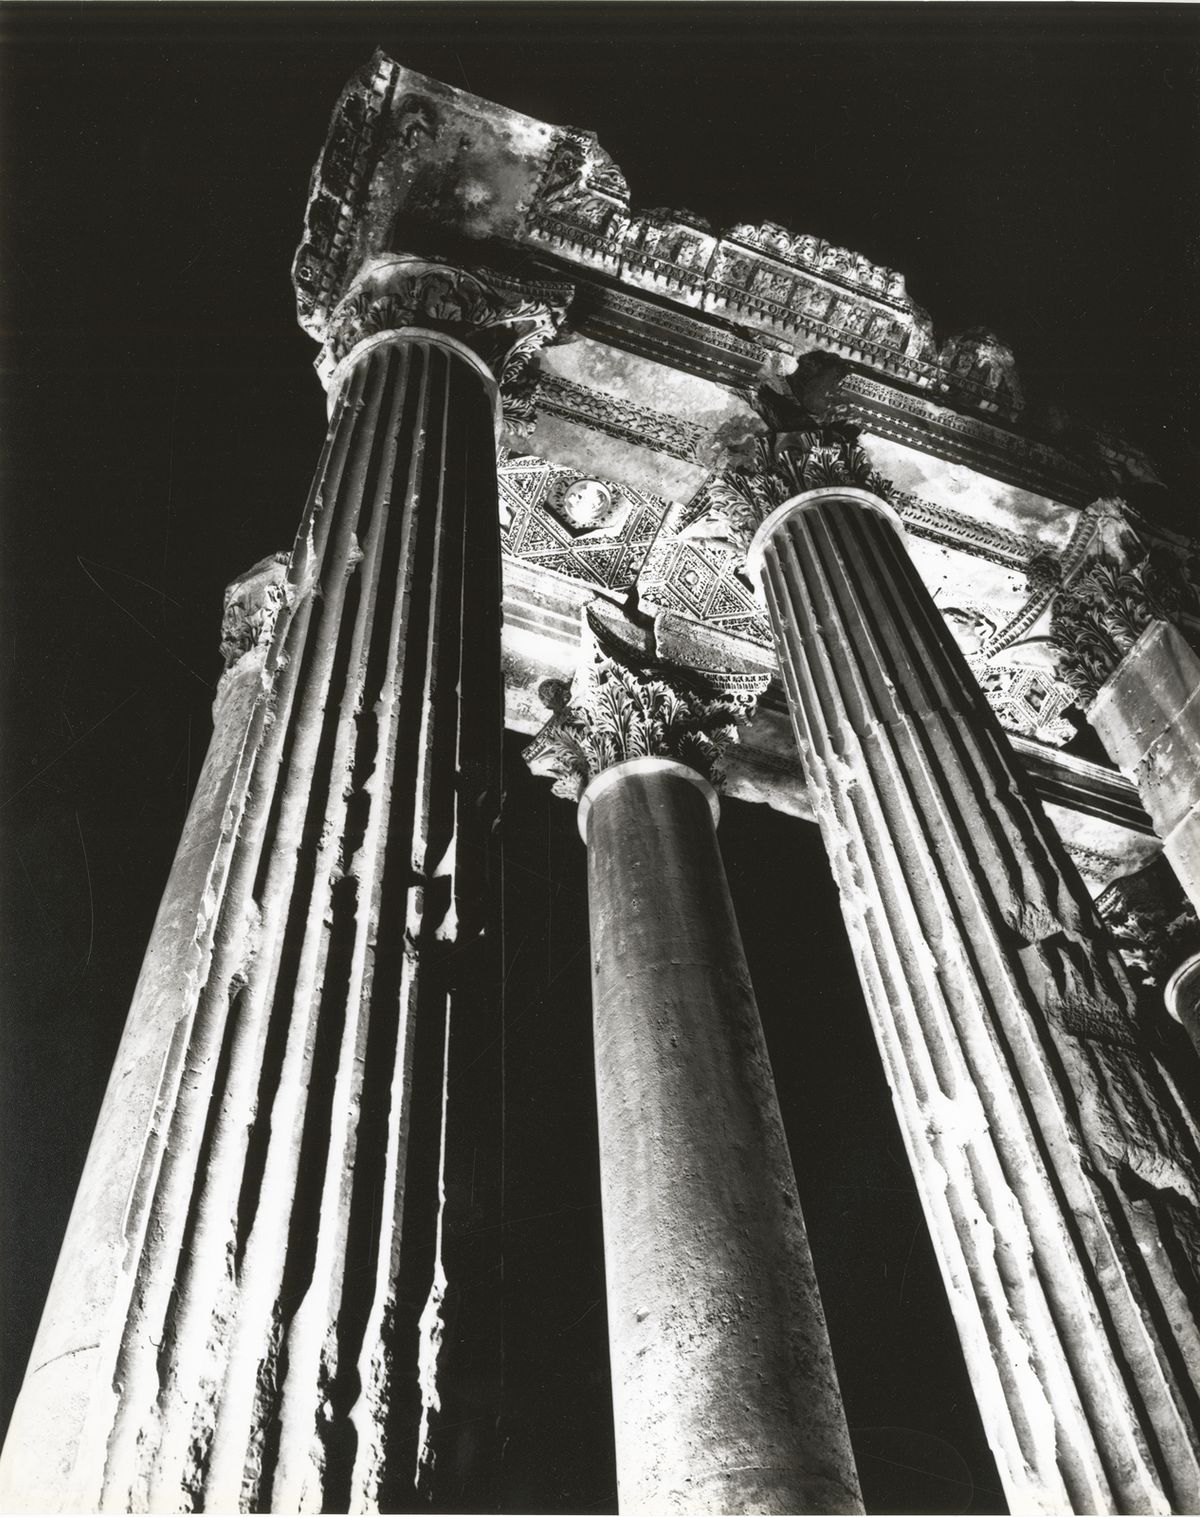 Manoug Alemian: Bacchus Temple at night, 1963 Photographic Collections of the Archives and  Special Collections, AUB Libraries